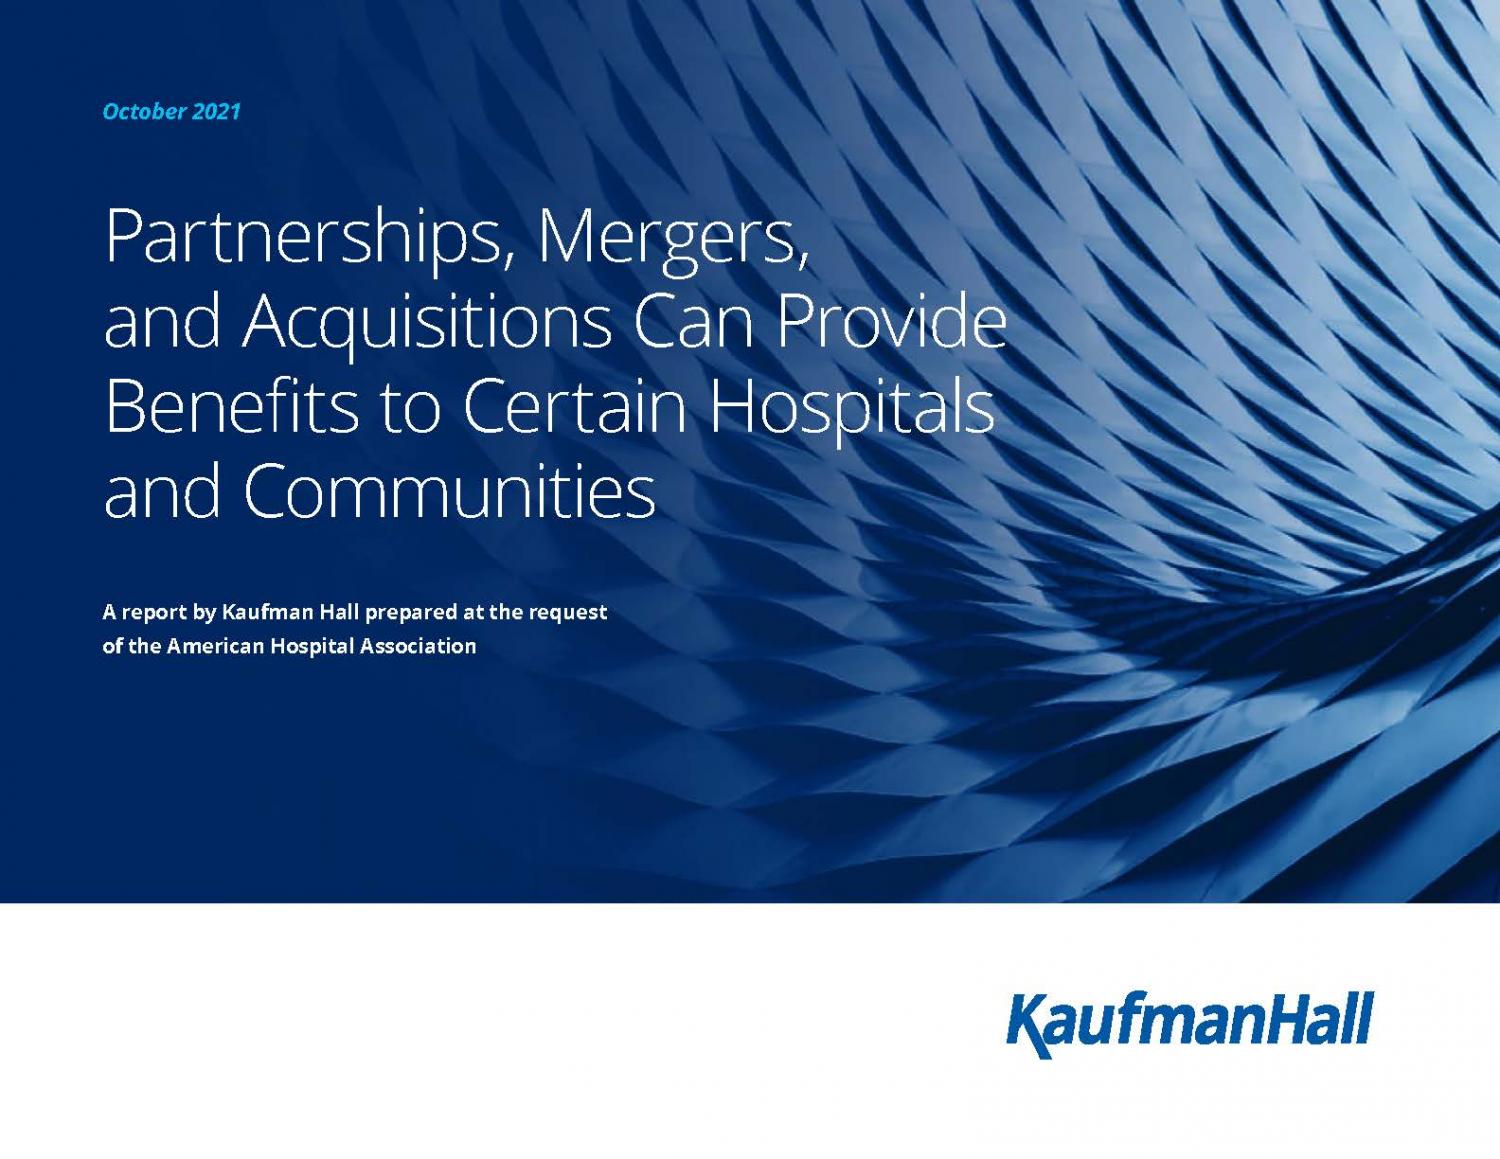 Partnerships, Mergers, and Acquisitions Can Provide Benefits to Certain Hospitals and Communities cover. October 22. A report by Kaufman Hall prepared at the request of the American Hospital Association.